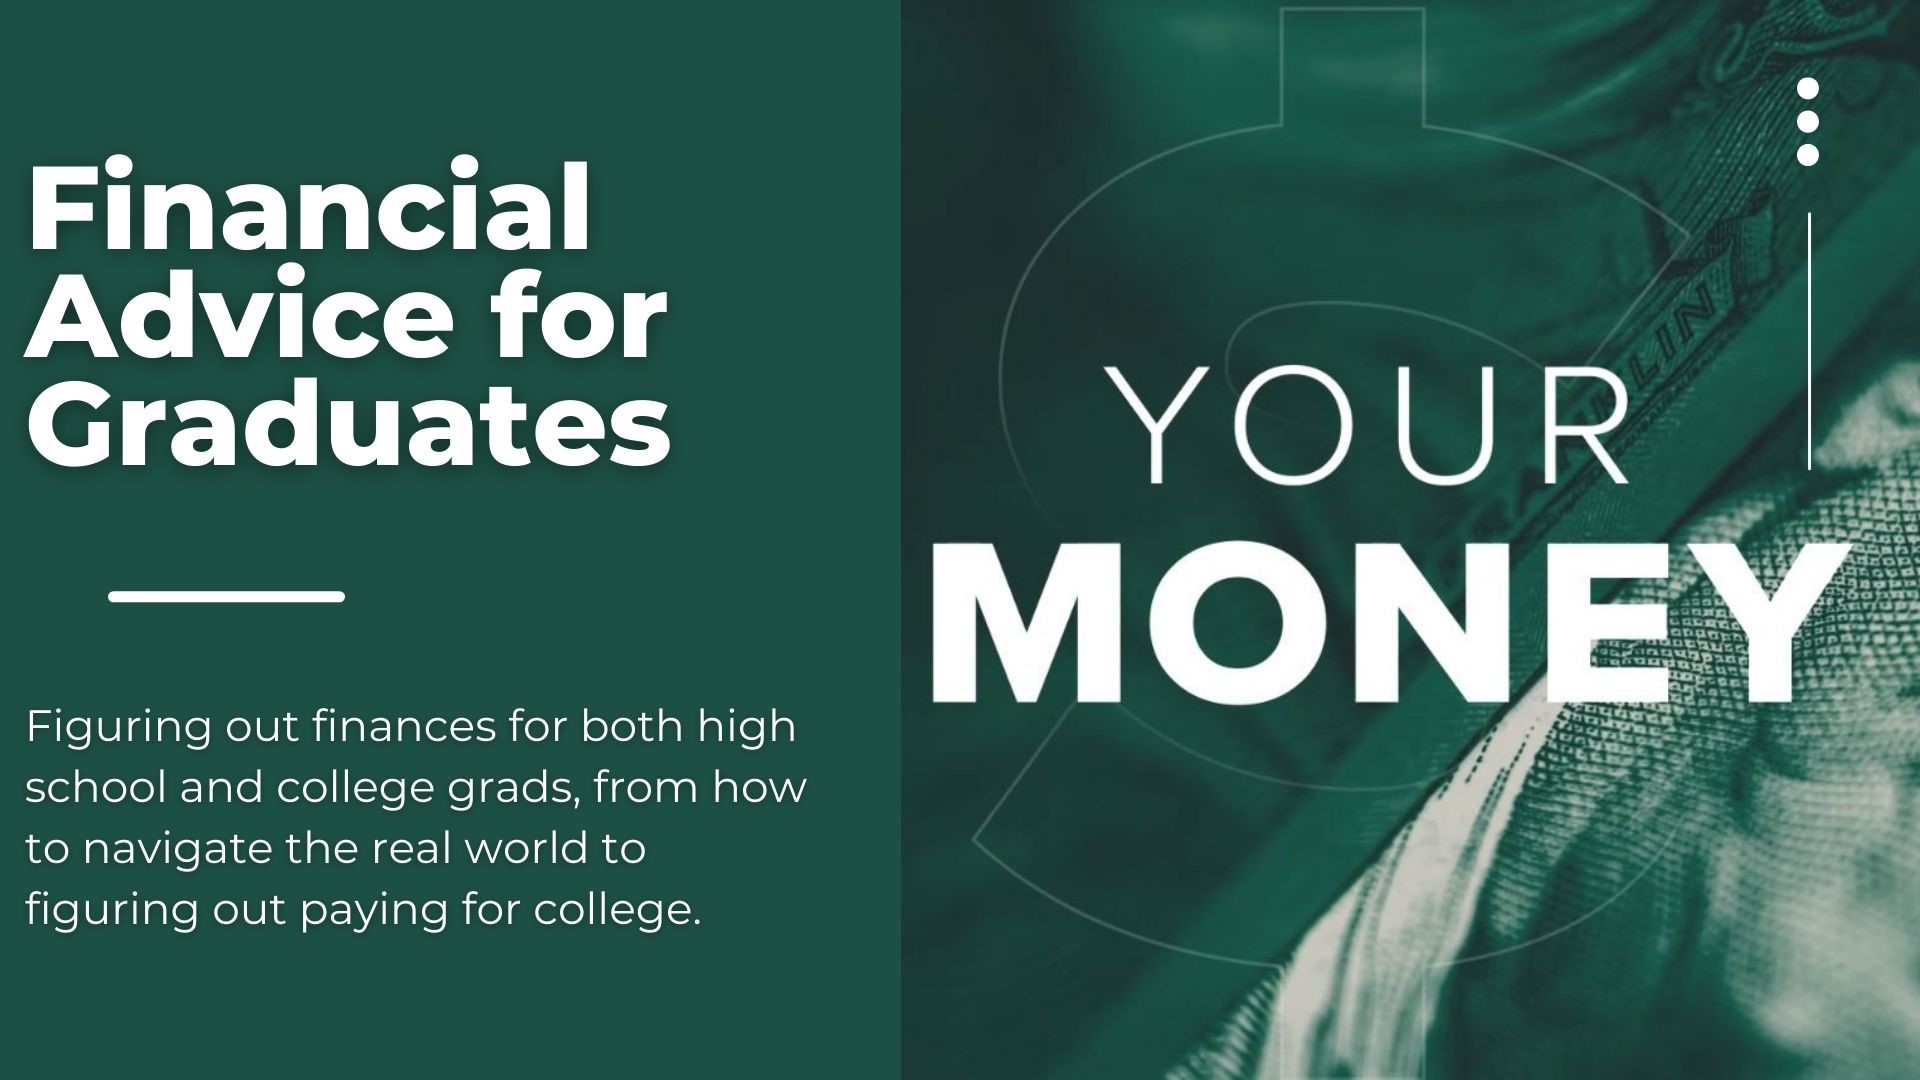 Figuring out finances for both high school and college grads, from how to navigate the real world to figuring out paying for college.